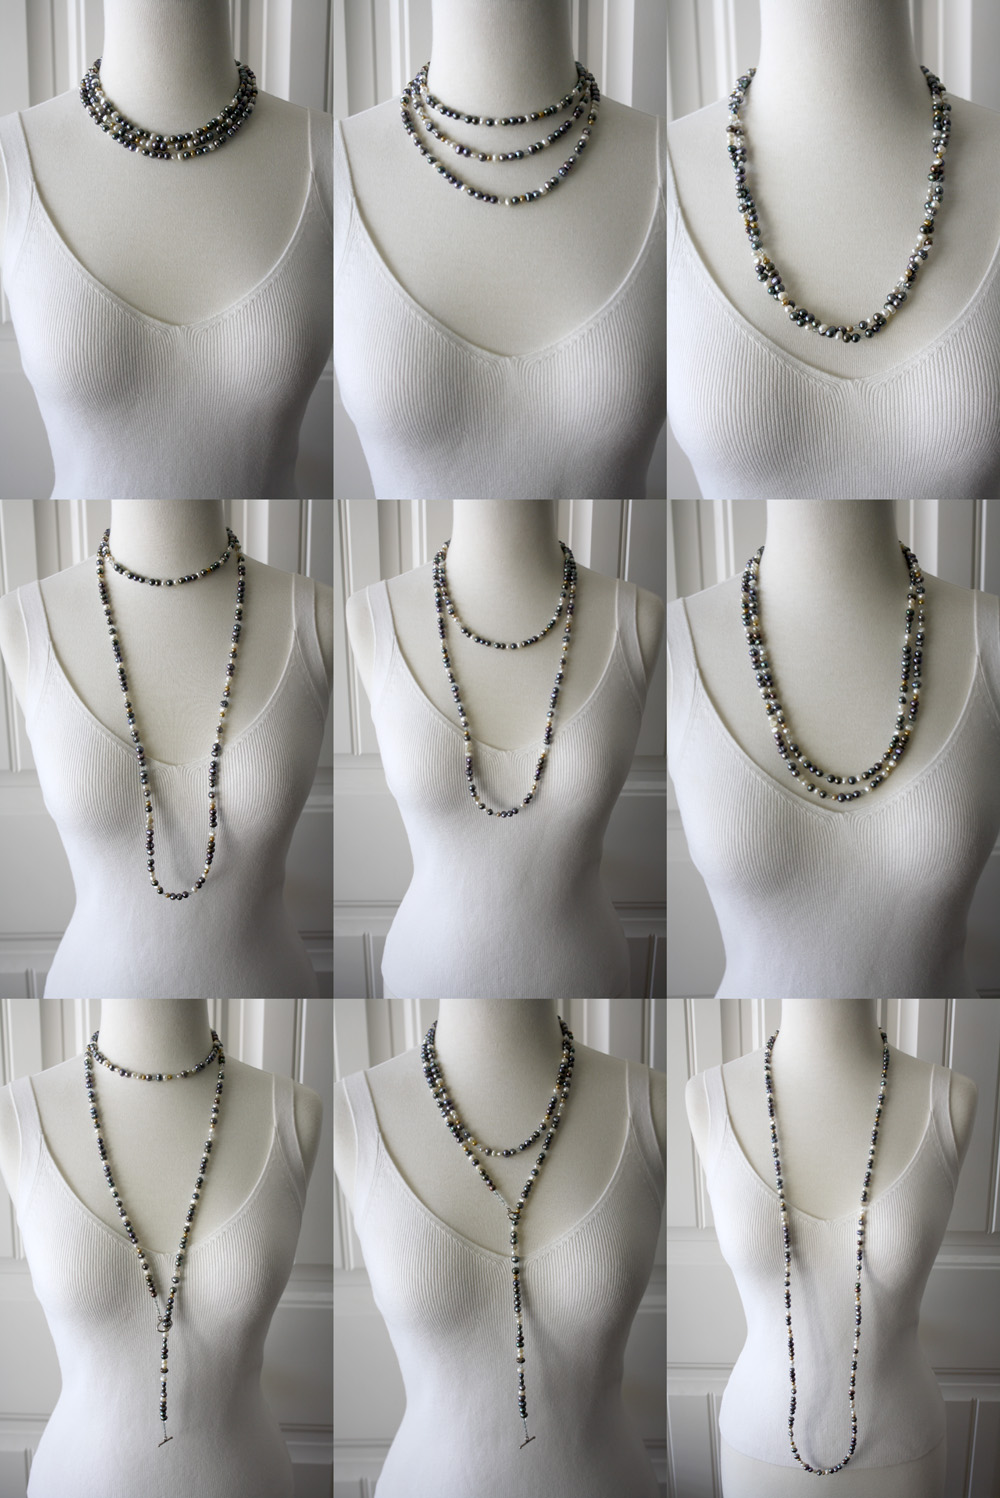 eNVe Designs: How to get more styles from your eNVe 50-inch Wrap necklaces!